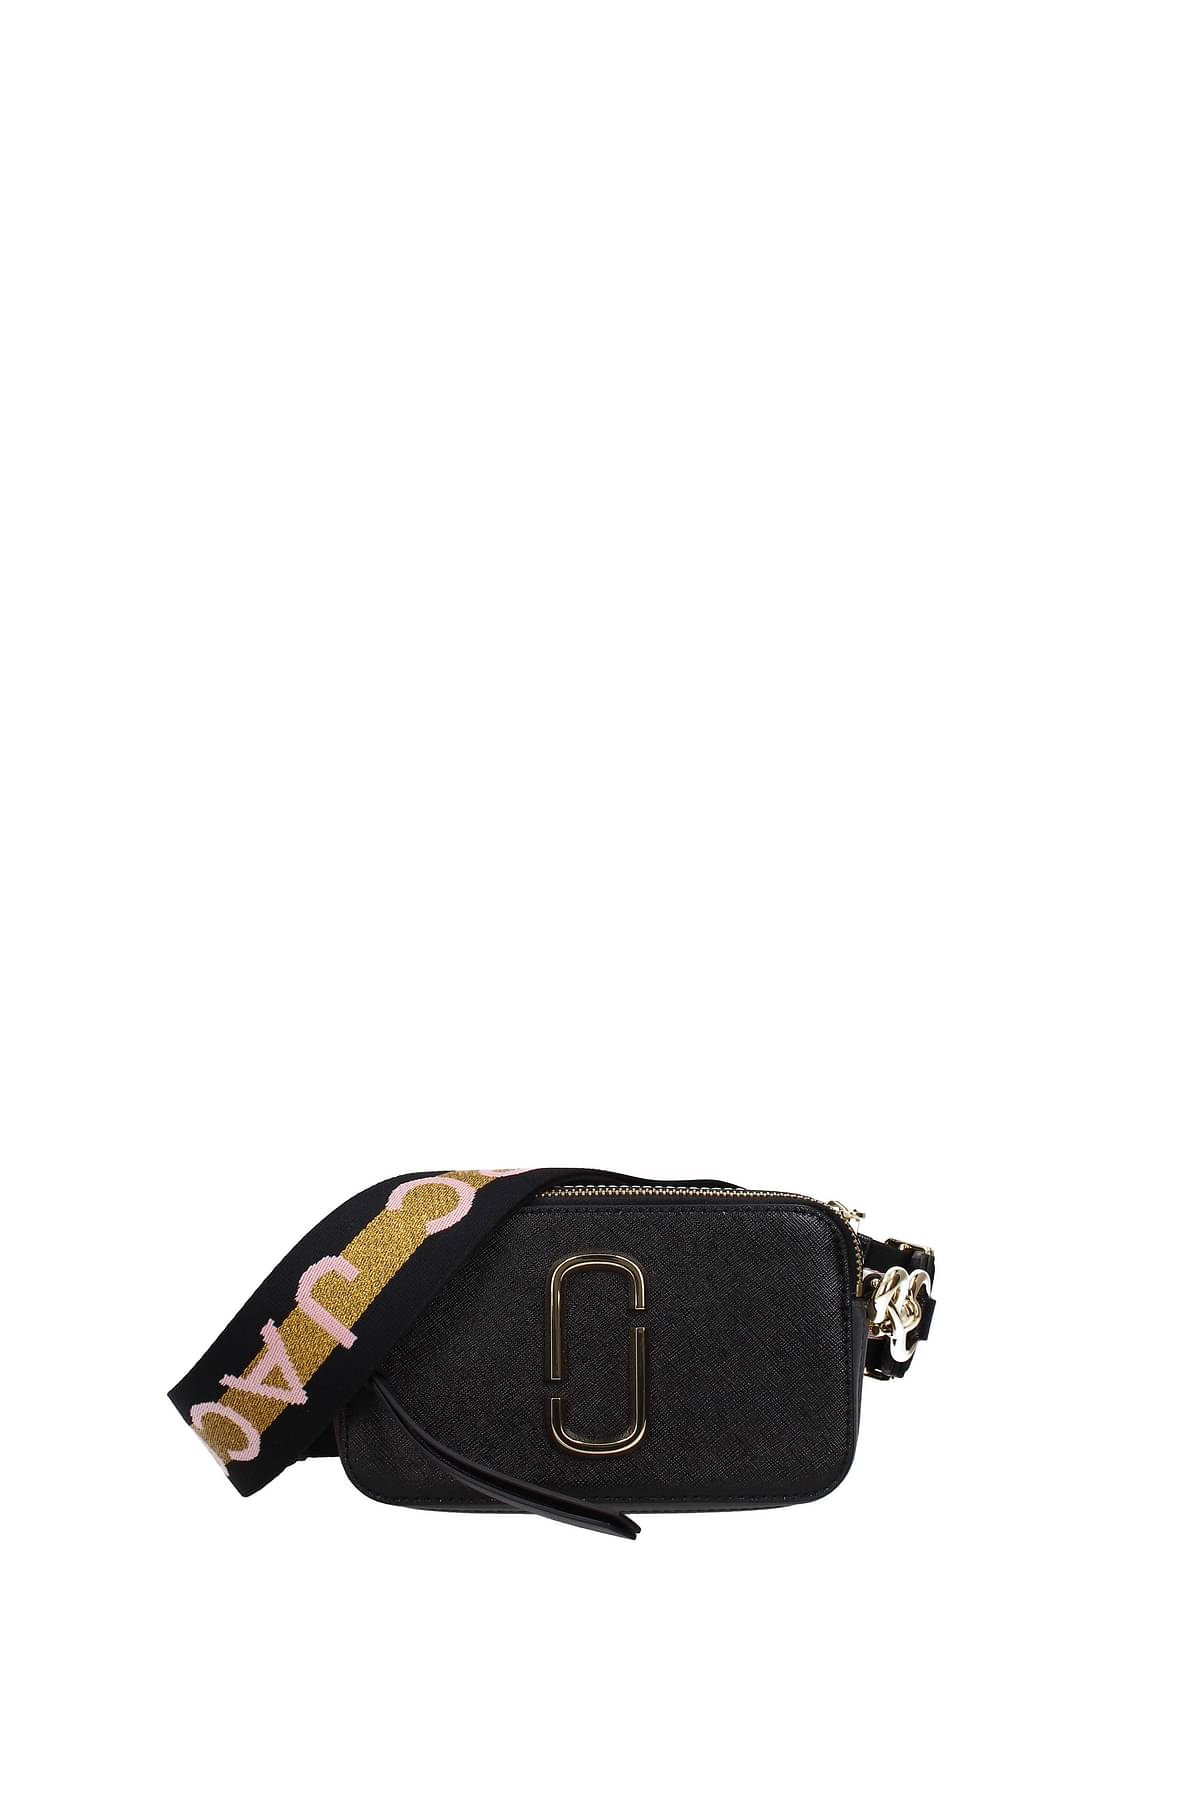 Marc By Marc Jacobs, Bags, Brand New Marc Jacobs Black Crossbody Bag